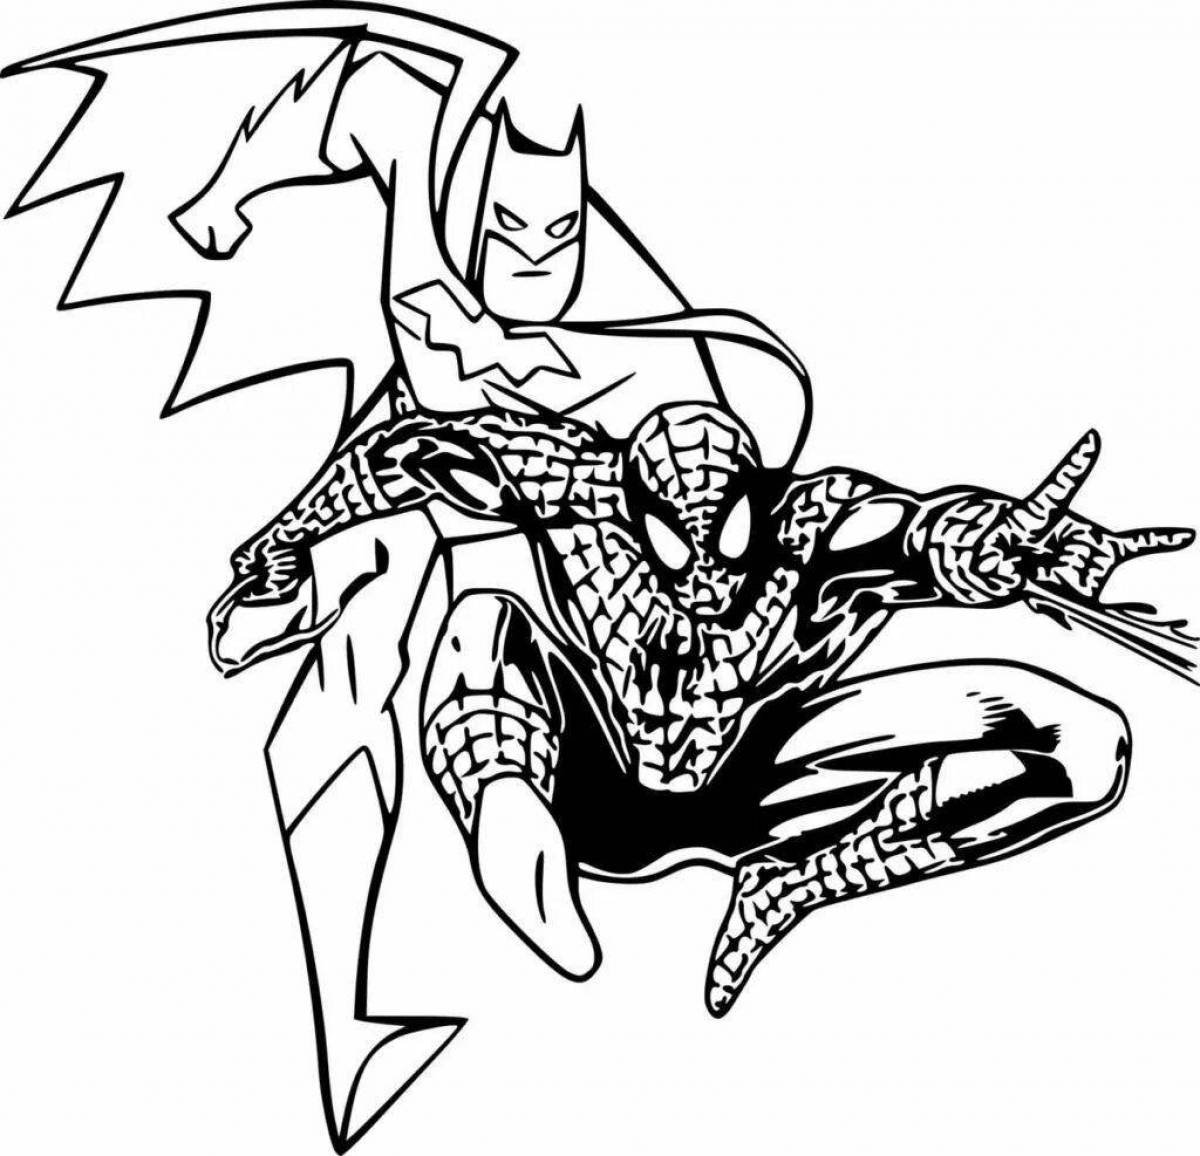 A fun coloring book for Superman and Spider-Man